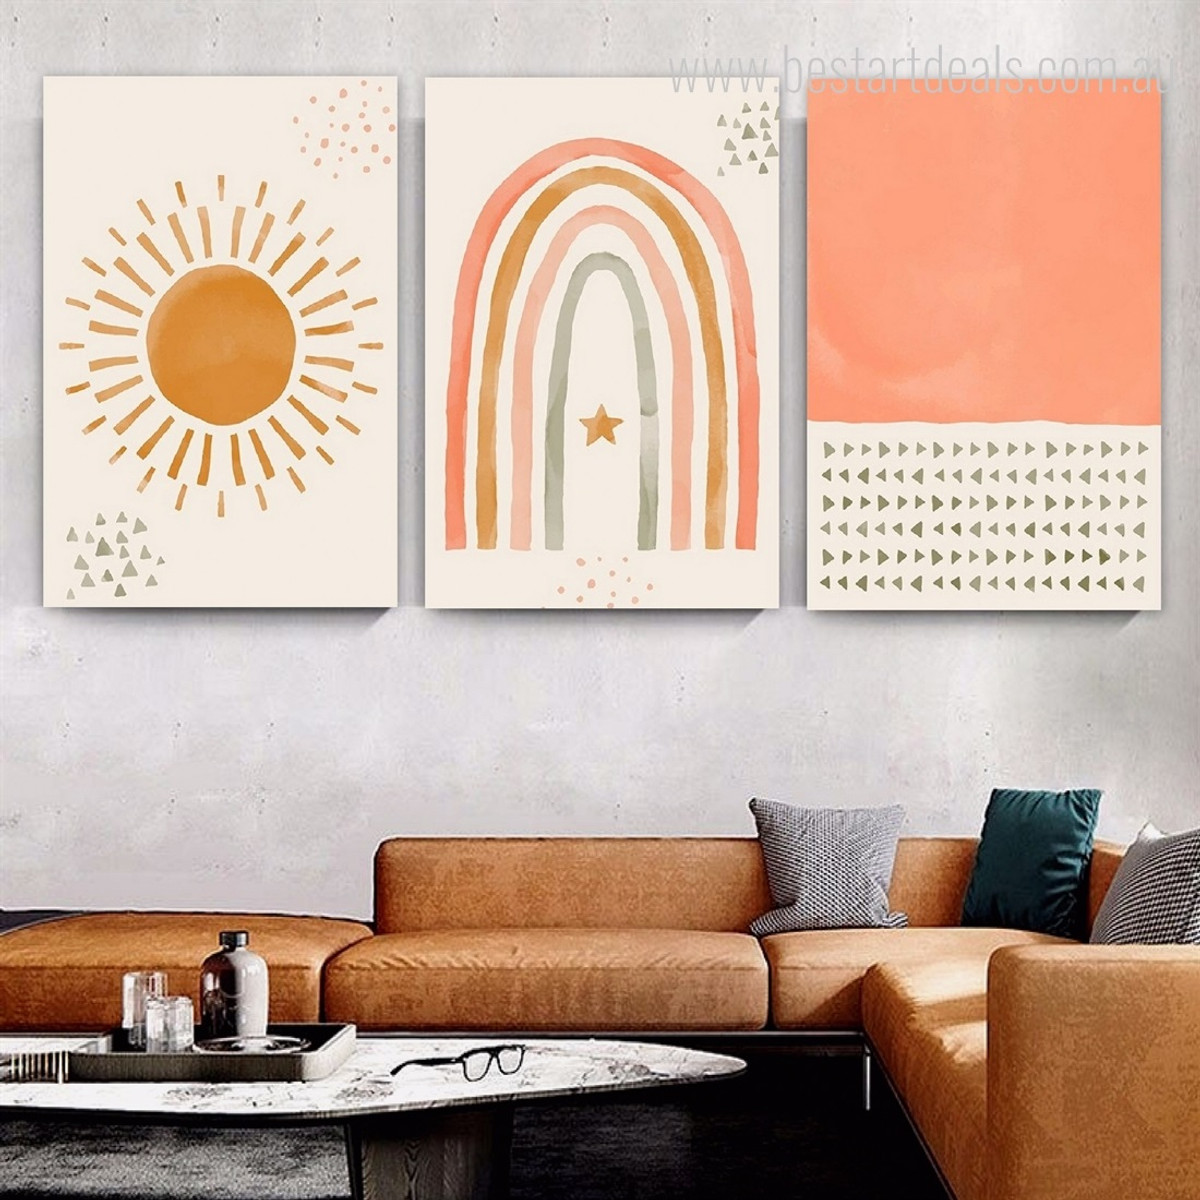 Triangular Tarnish Stars Sun Abstract Nursery 3 Multi Panel Painting Set Photograph Watercolor Print on Stretched Canvas for Wall Hanging Tracery